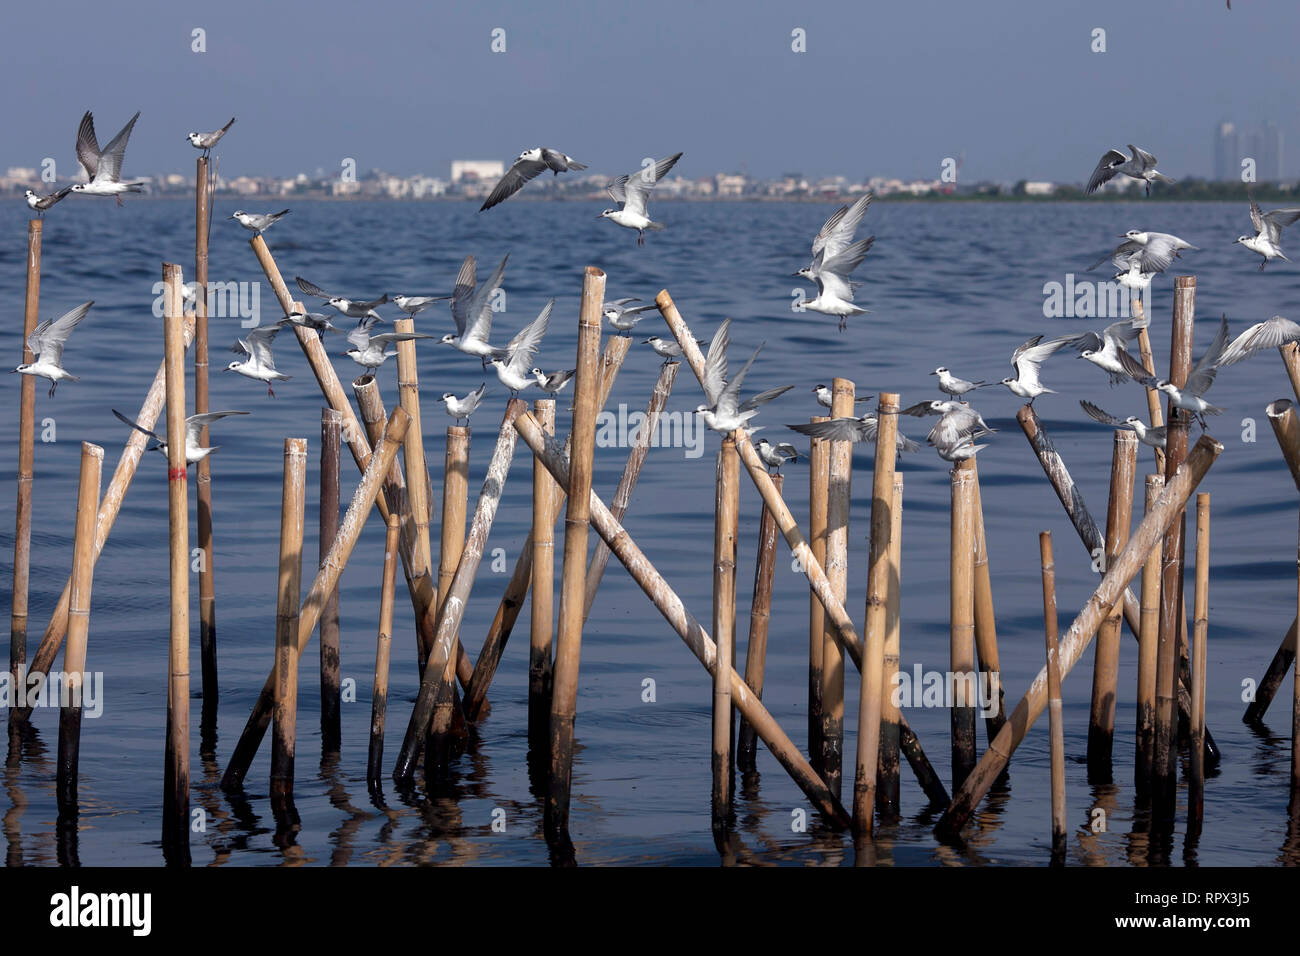 Birds flying on wooden posts, Indonesia Stock Photo